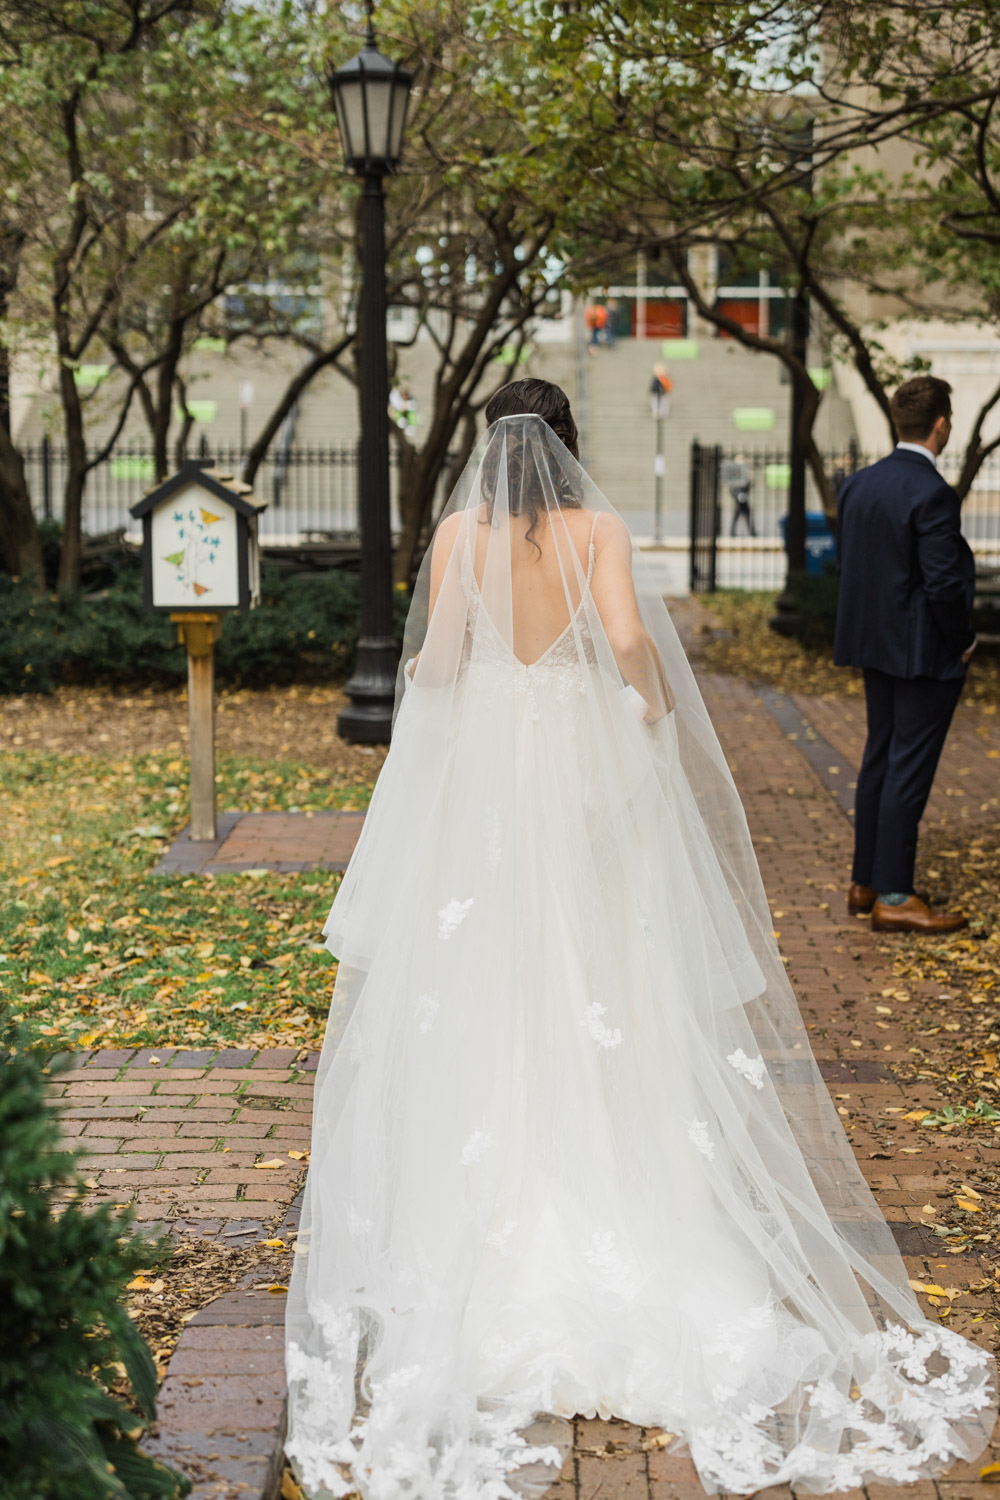 A first look moment in Seneca Park in downtown Chicago